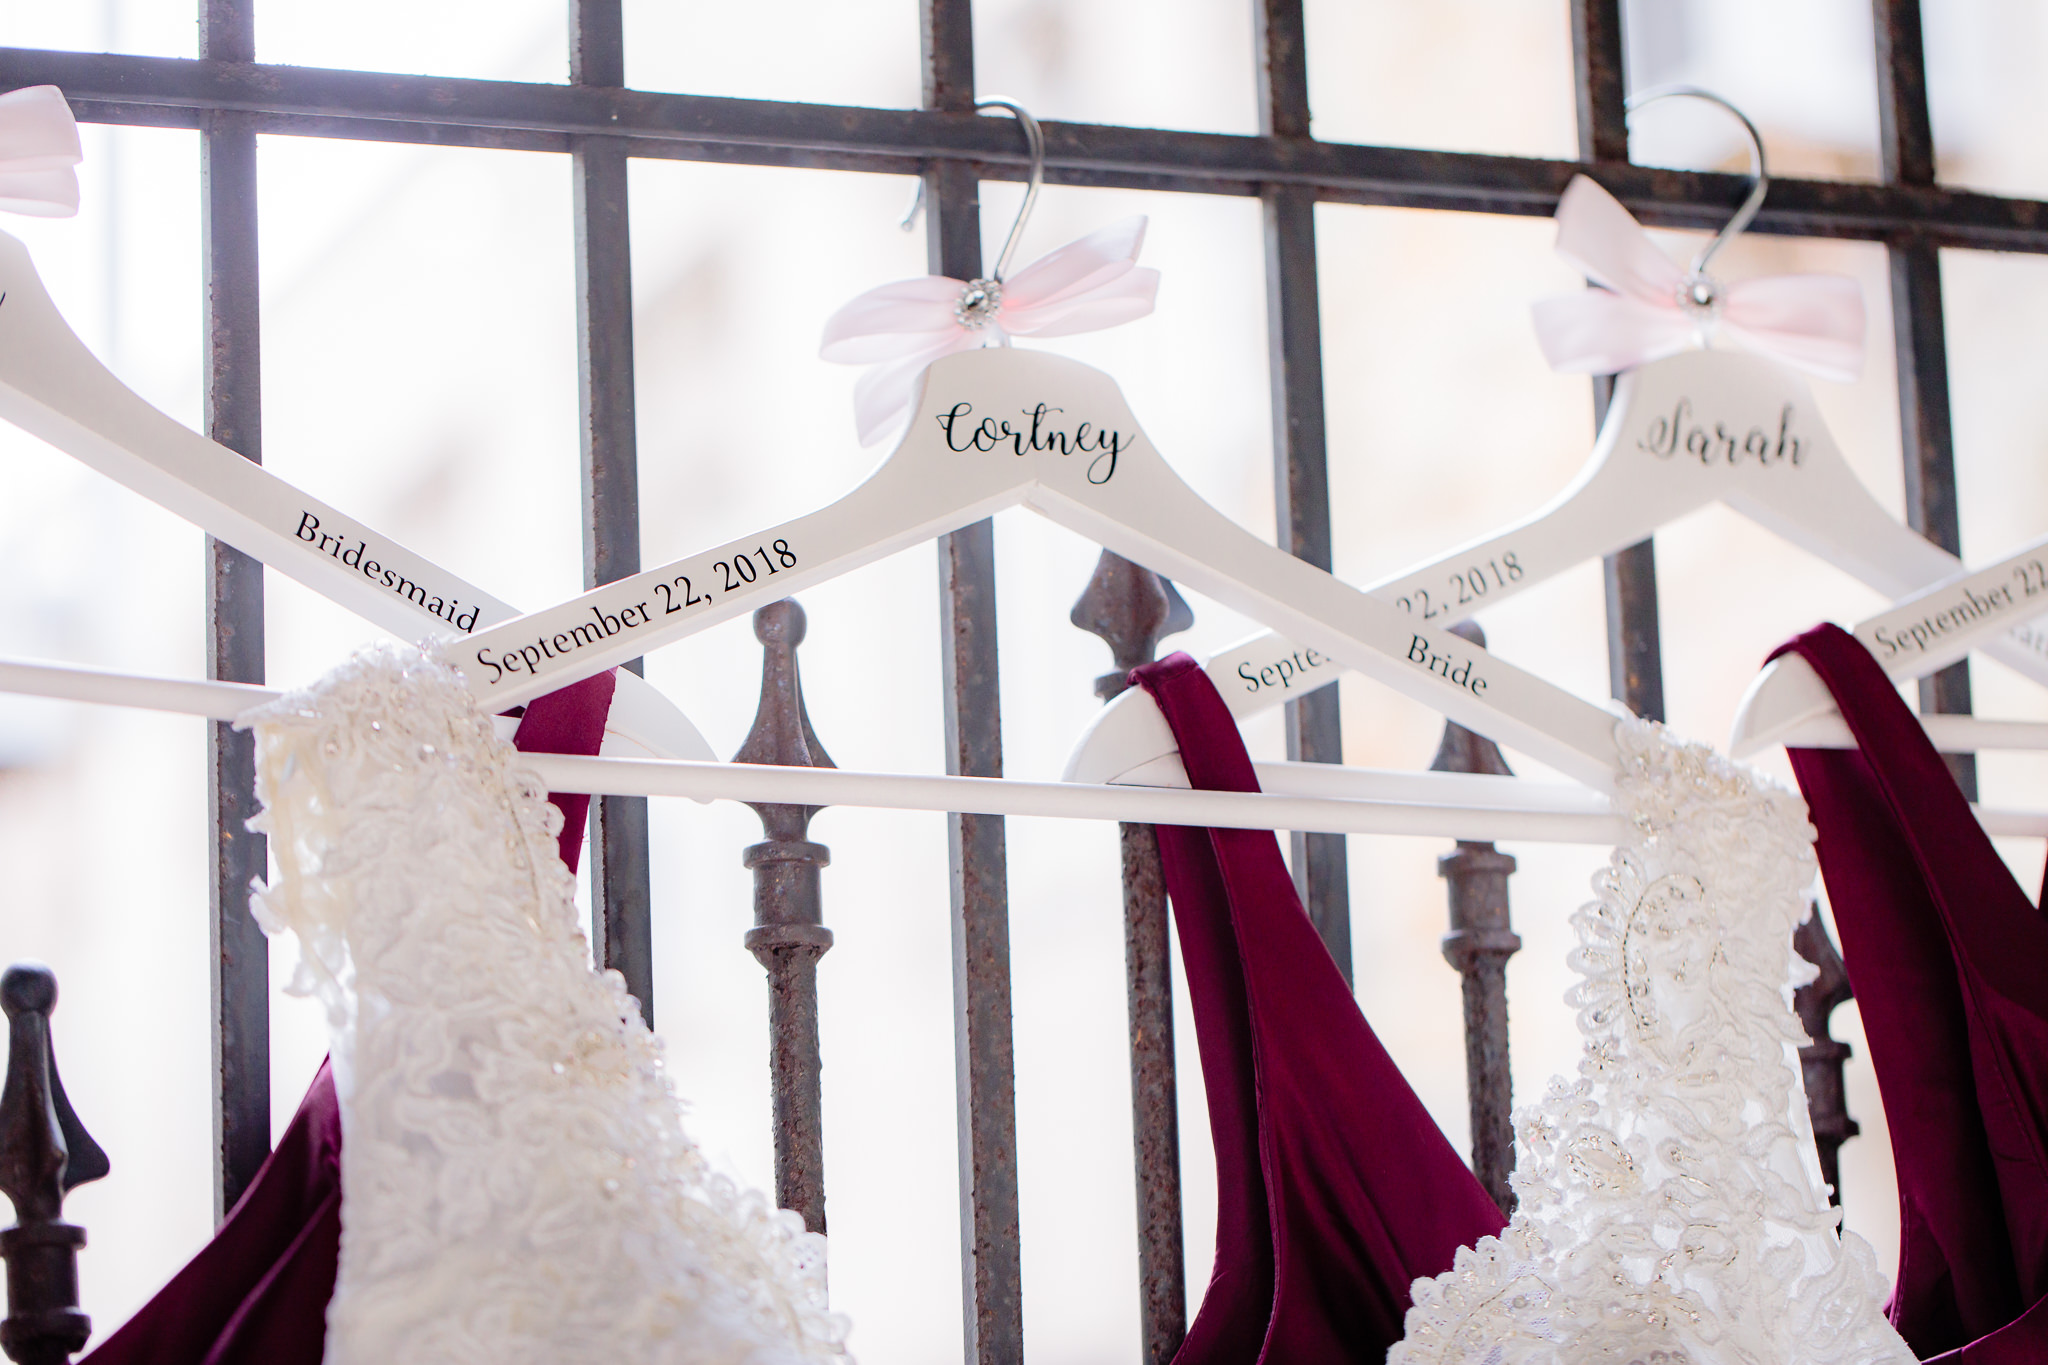 Dress hangers enscribed with the bride's name and the date of the wedding at Mt. Lebanon United Methodist Church